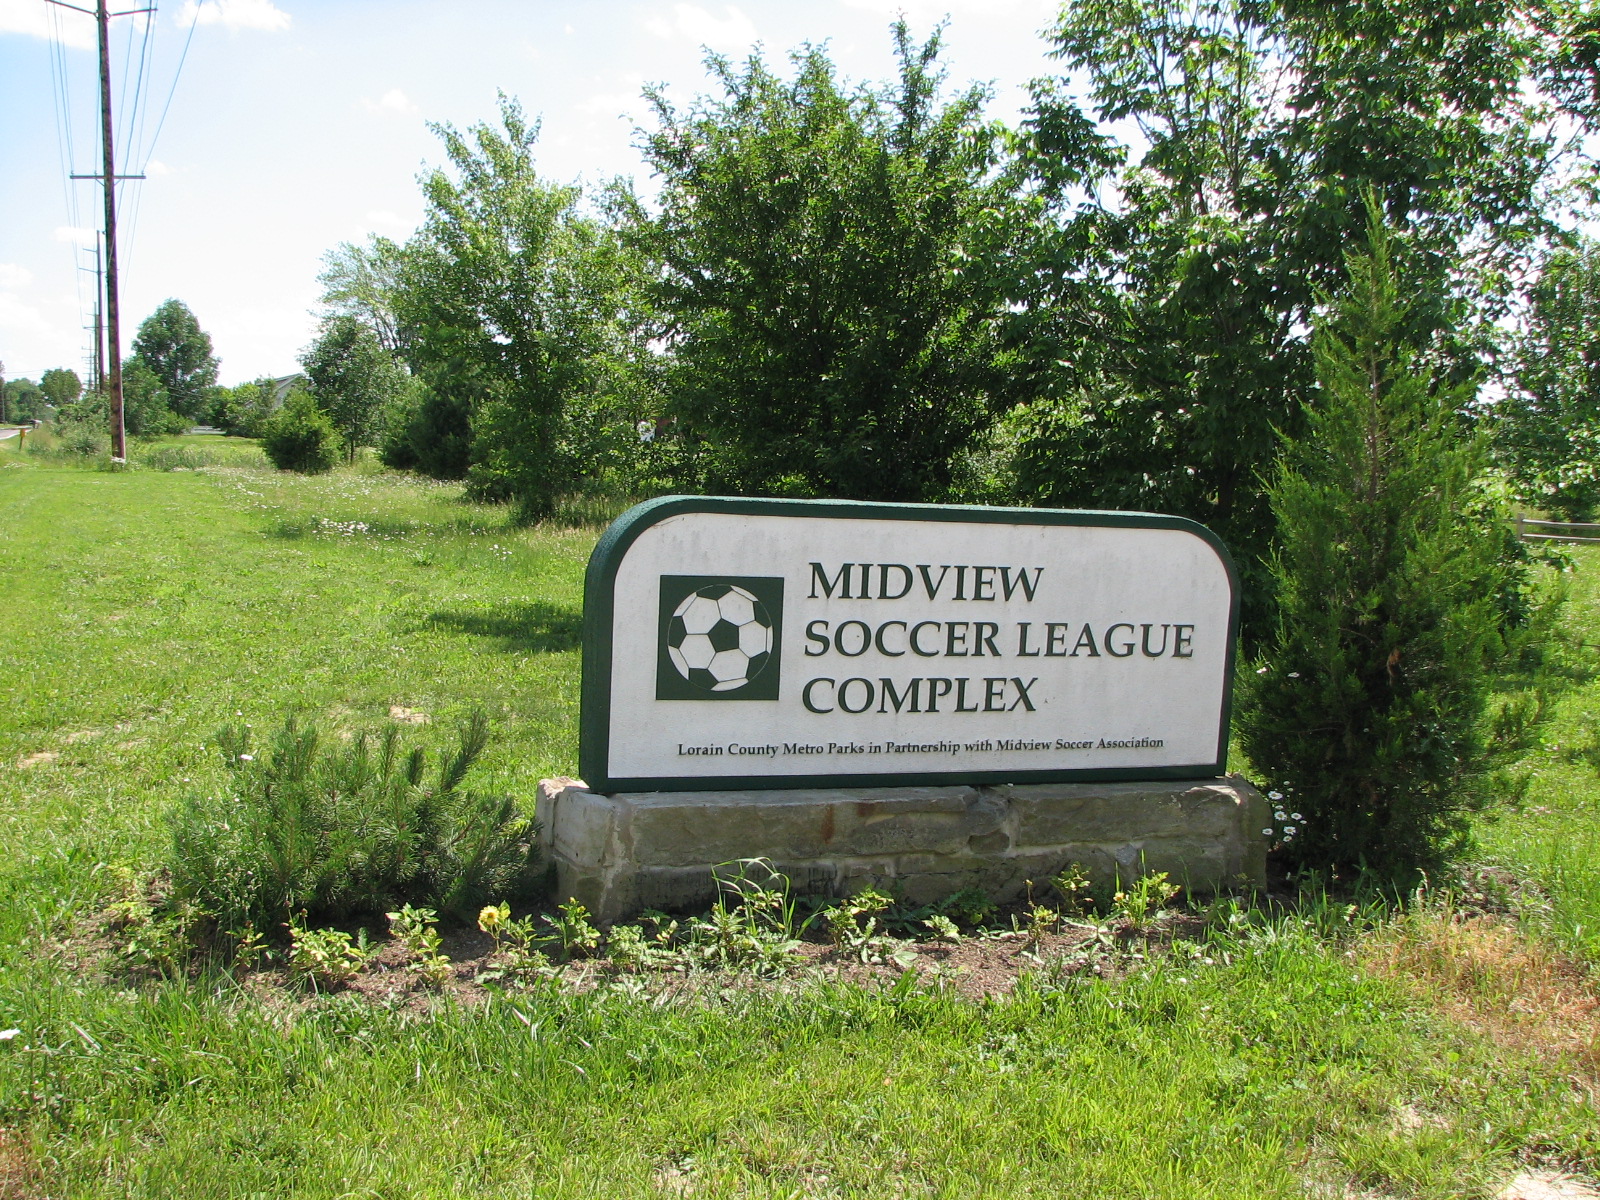 Entrance to the Midview Soccer Complex